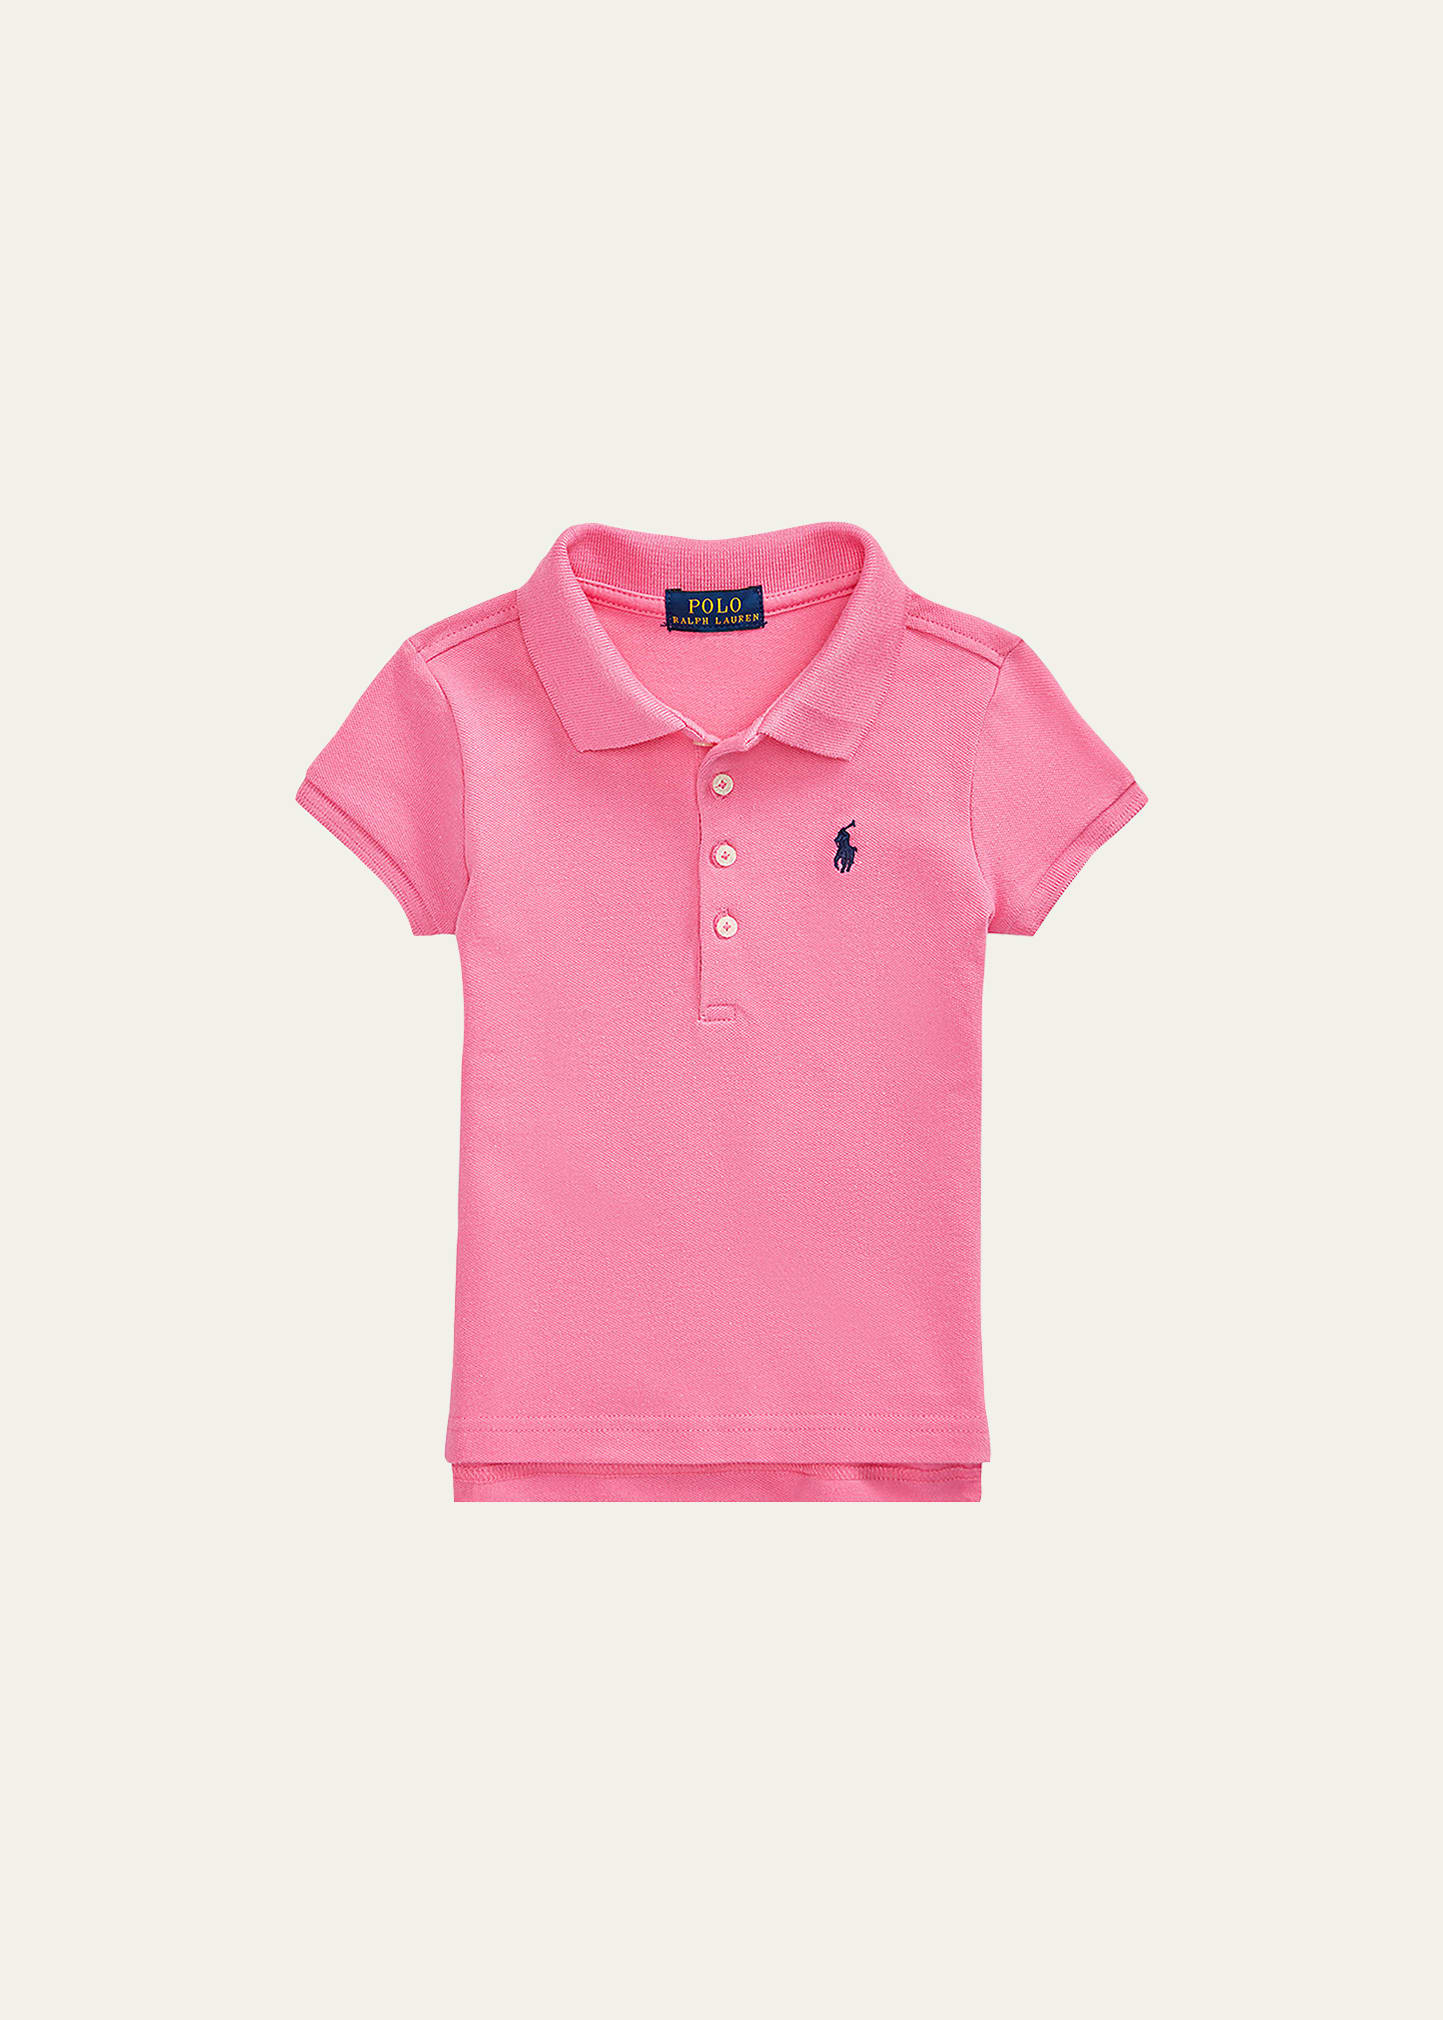 Girl's Logo Embroidered Short-Sleeve Polo Shirt, Size 2-6X